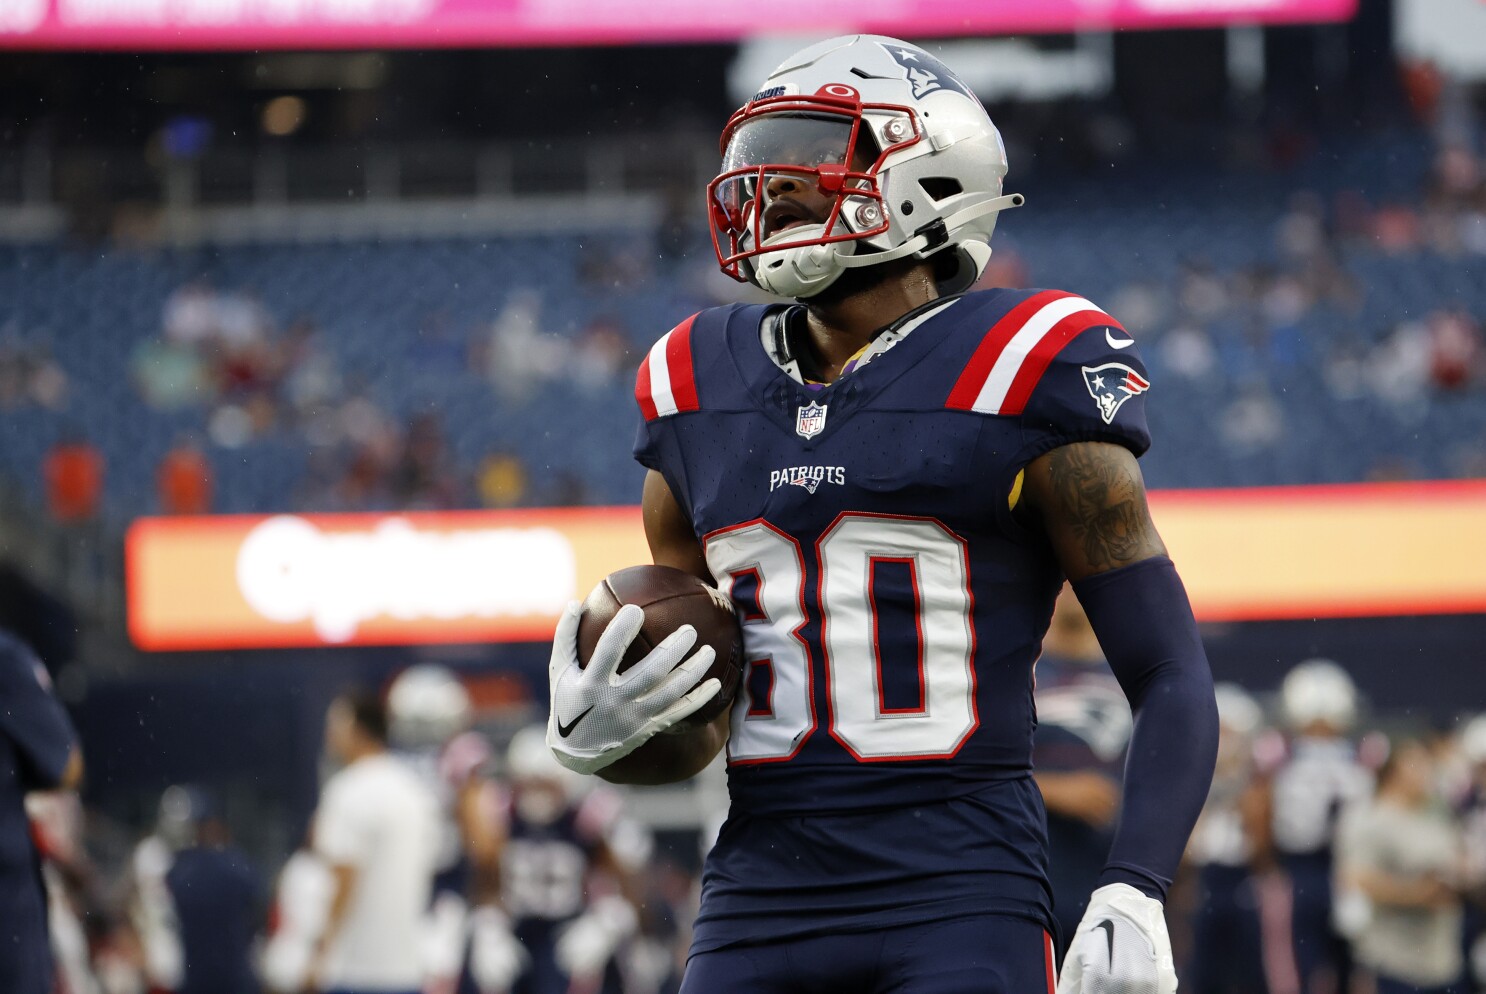 Kayshon Boutte is currently facing charges of gaming fraud. (Photo: NBC Sports)